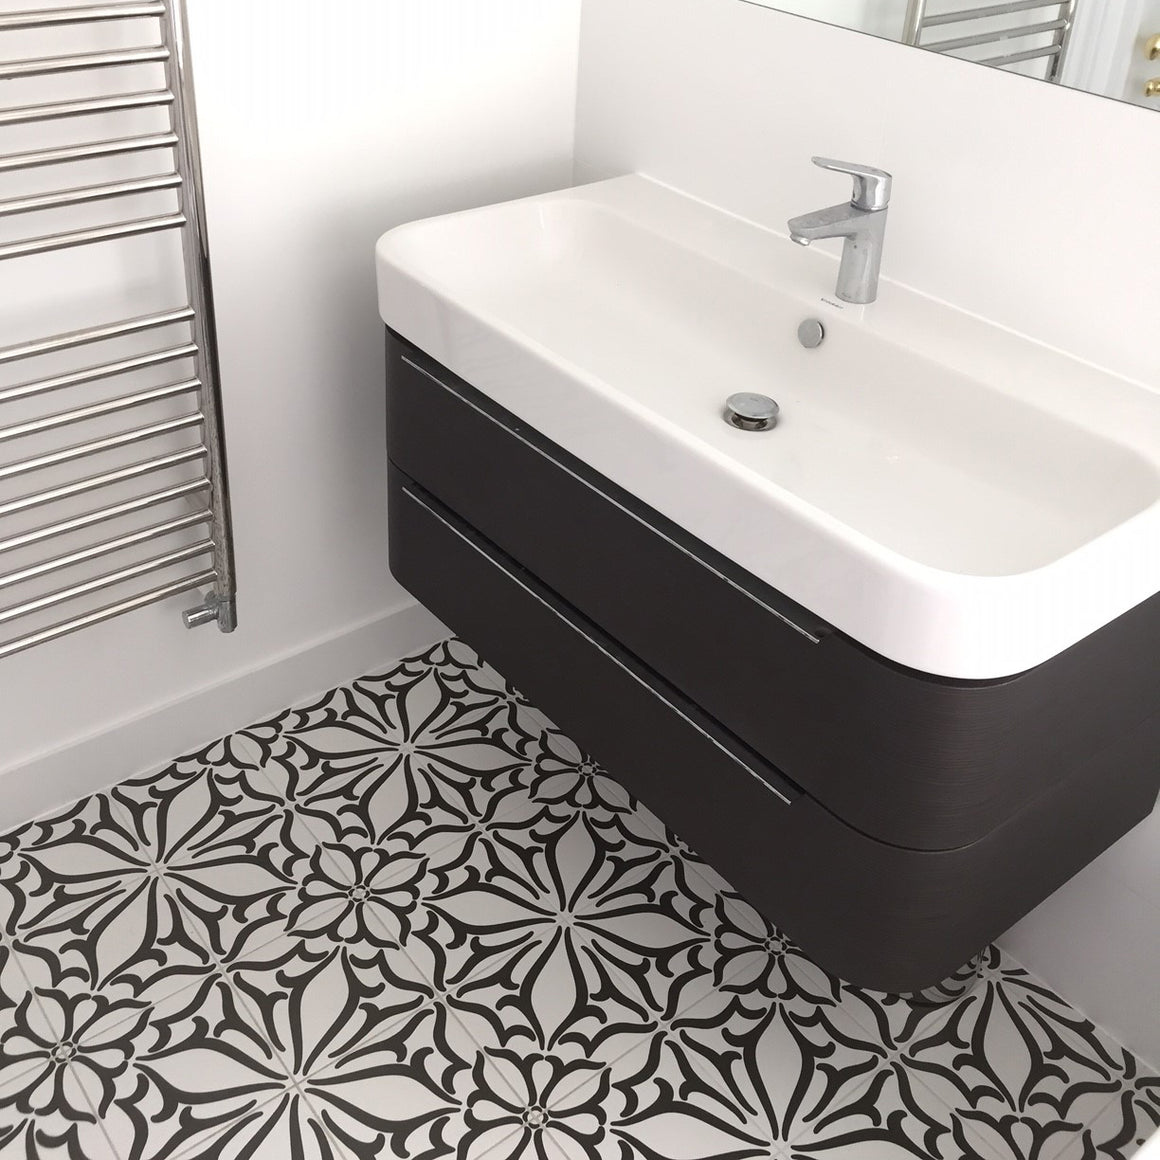 Pistil Black and White timeless matte porcelain decorative pattern tile for residential and commercial bathroom and kitchen floor and wall imported from Portugal, Kerion Décor Classic C Noir available from TilesInspired Canada's Online Tile Store delivering across Ontario and Quebec, including Toronto, Montreal, Ottawa, London, Windsor, Kitchener, Muskoka, Barrie, Kingston, Hamilton, and Niagara tile idea